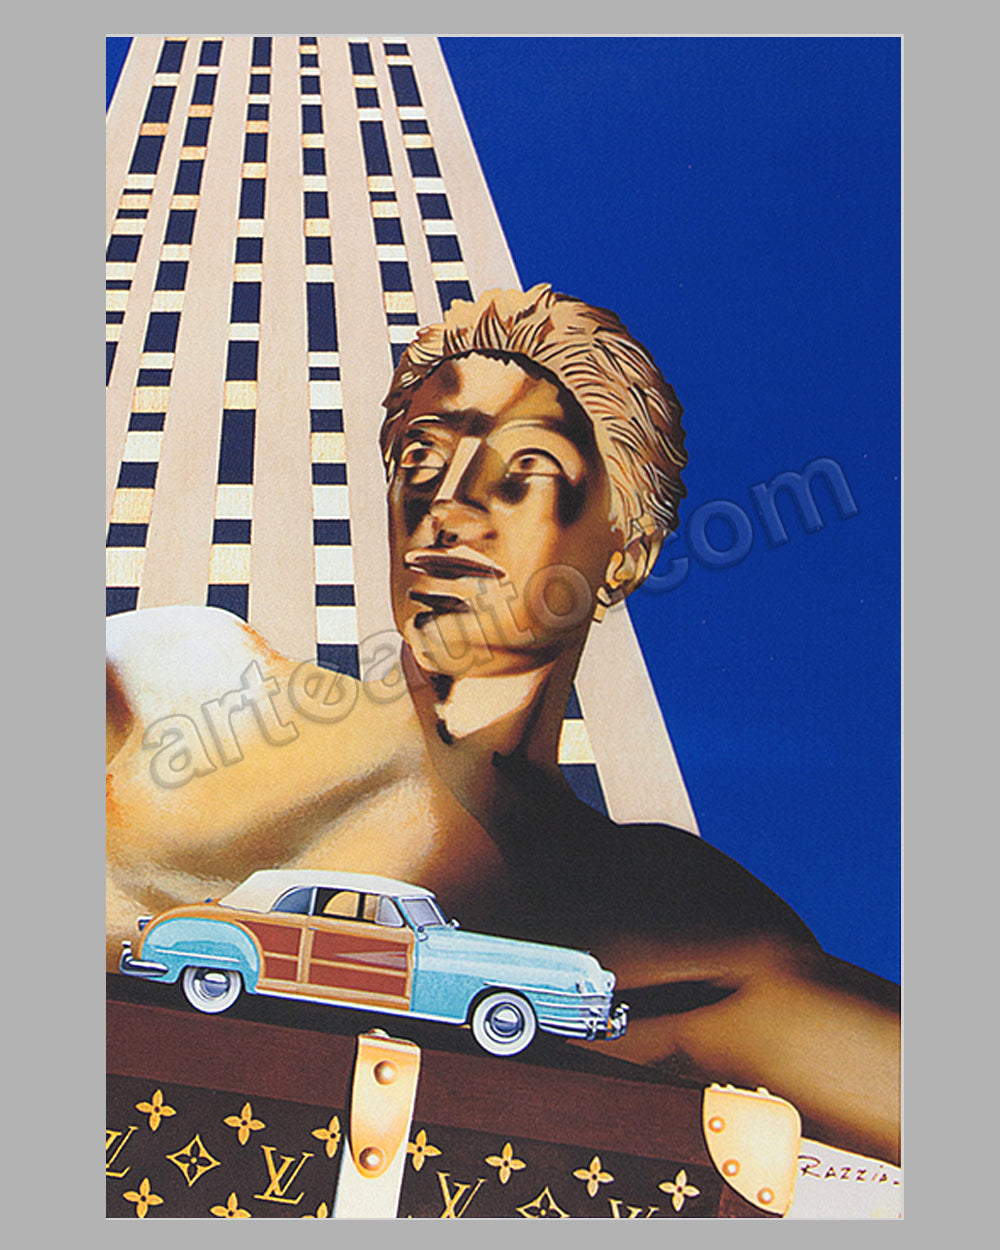 Louis Vuitton Classic at Rockefeller Center 1996 large poster by Razzia  Temporarily Out of Stock$625.00